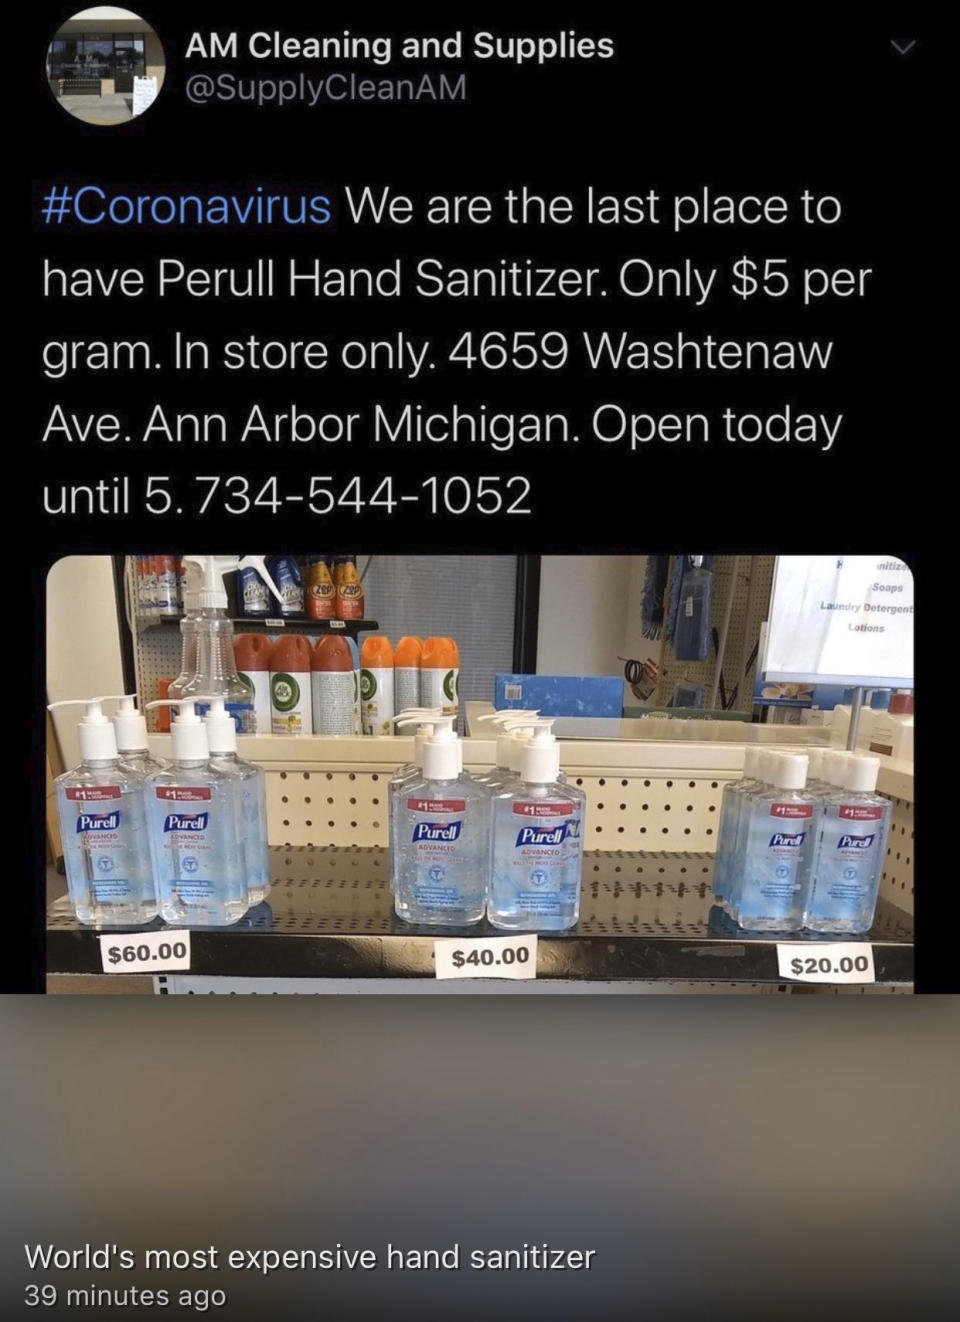 This image provided by the Michigan attorney general’s office in March 2020 shows what they say is a screengrab from the Twitter account of A.M. Cleaning and Supplies in Ann Arbor Mich., advertising Purell hand sanitizer. After customer backlash and a cease-and-desist letter from the Michigan attorney general’s office, the owner since said that the prices of $60, $40 and $20 were intended to be for eight bottles _ not one as the photo and tweet’s text indicated _ and the signage didn’t make that clear. (Michigan attorney general's office via AP)